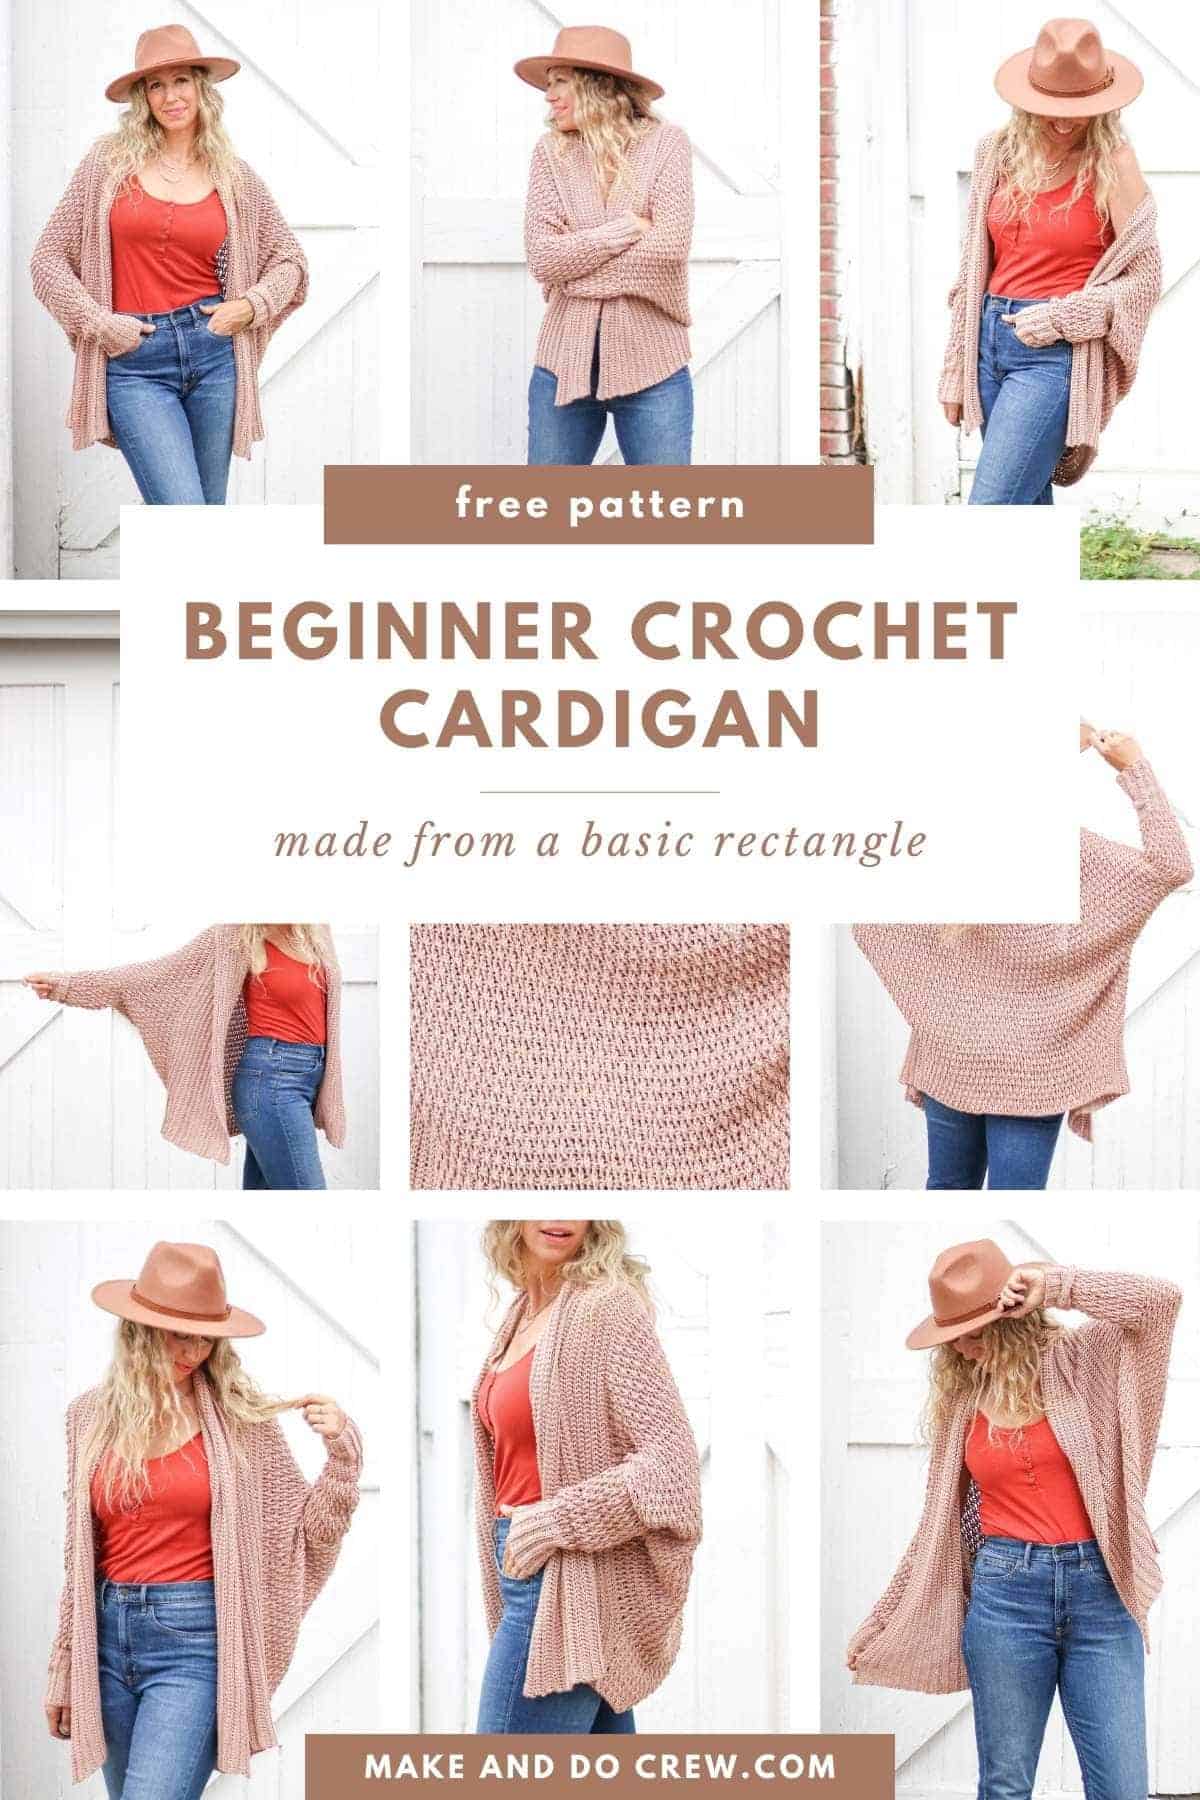 A plus size crochet cardigan shown from multiple angles.